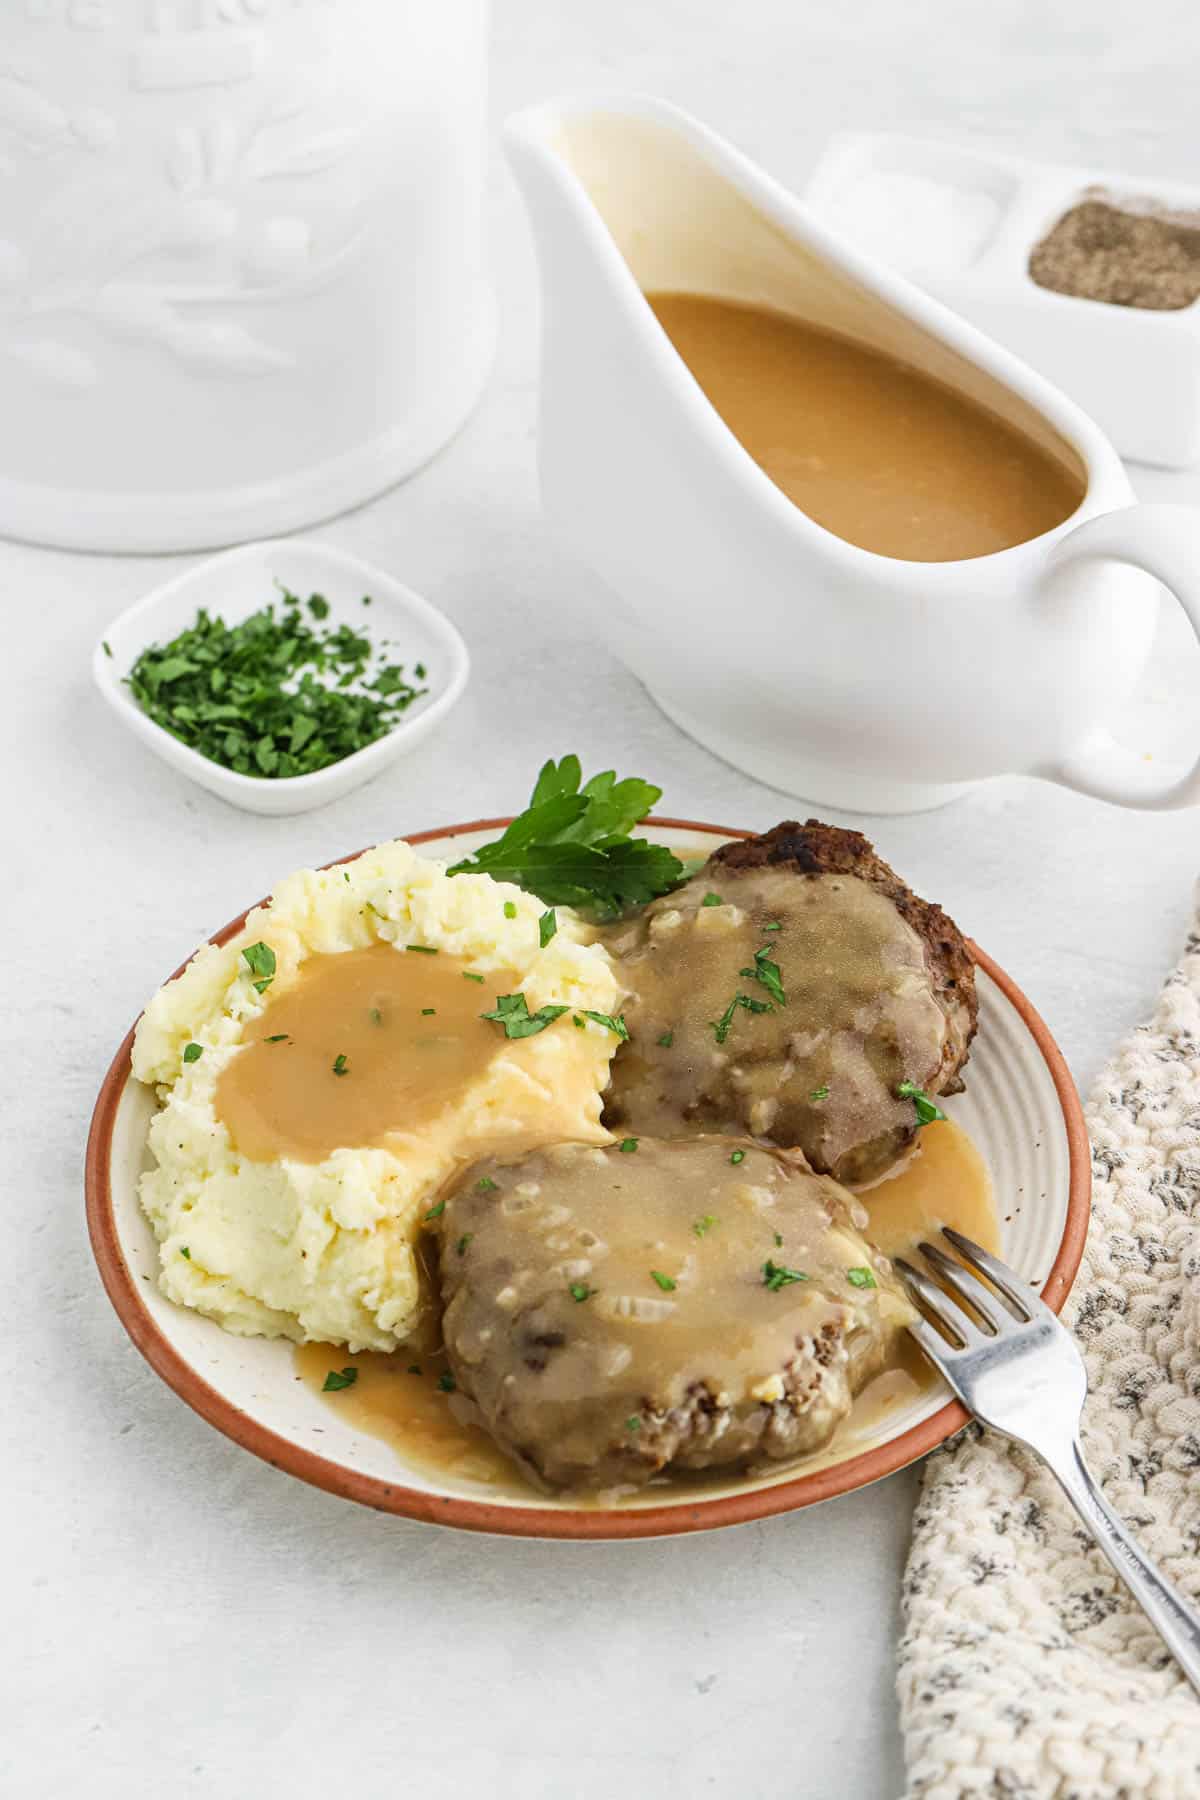 A plate of mashed potatoes and salisbury steak with brown gravy on top and a gravy boat next to it